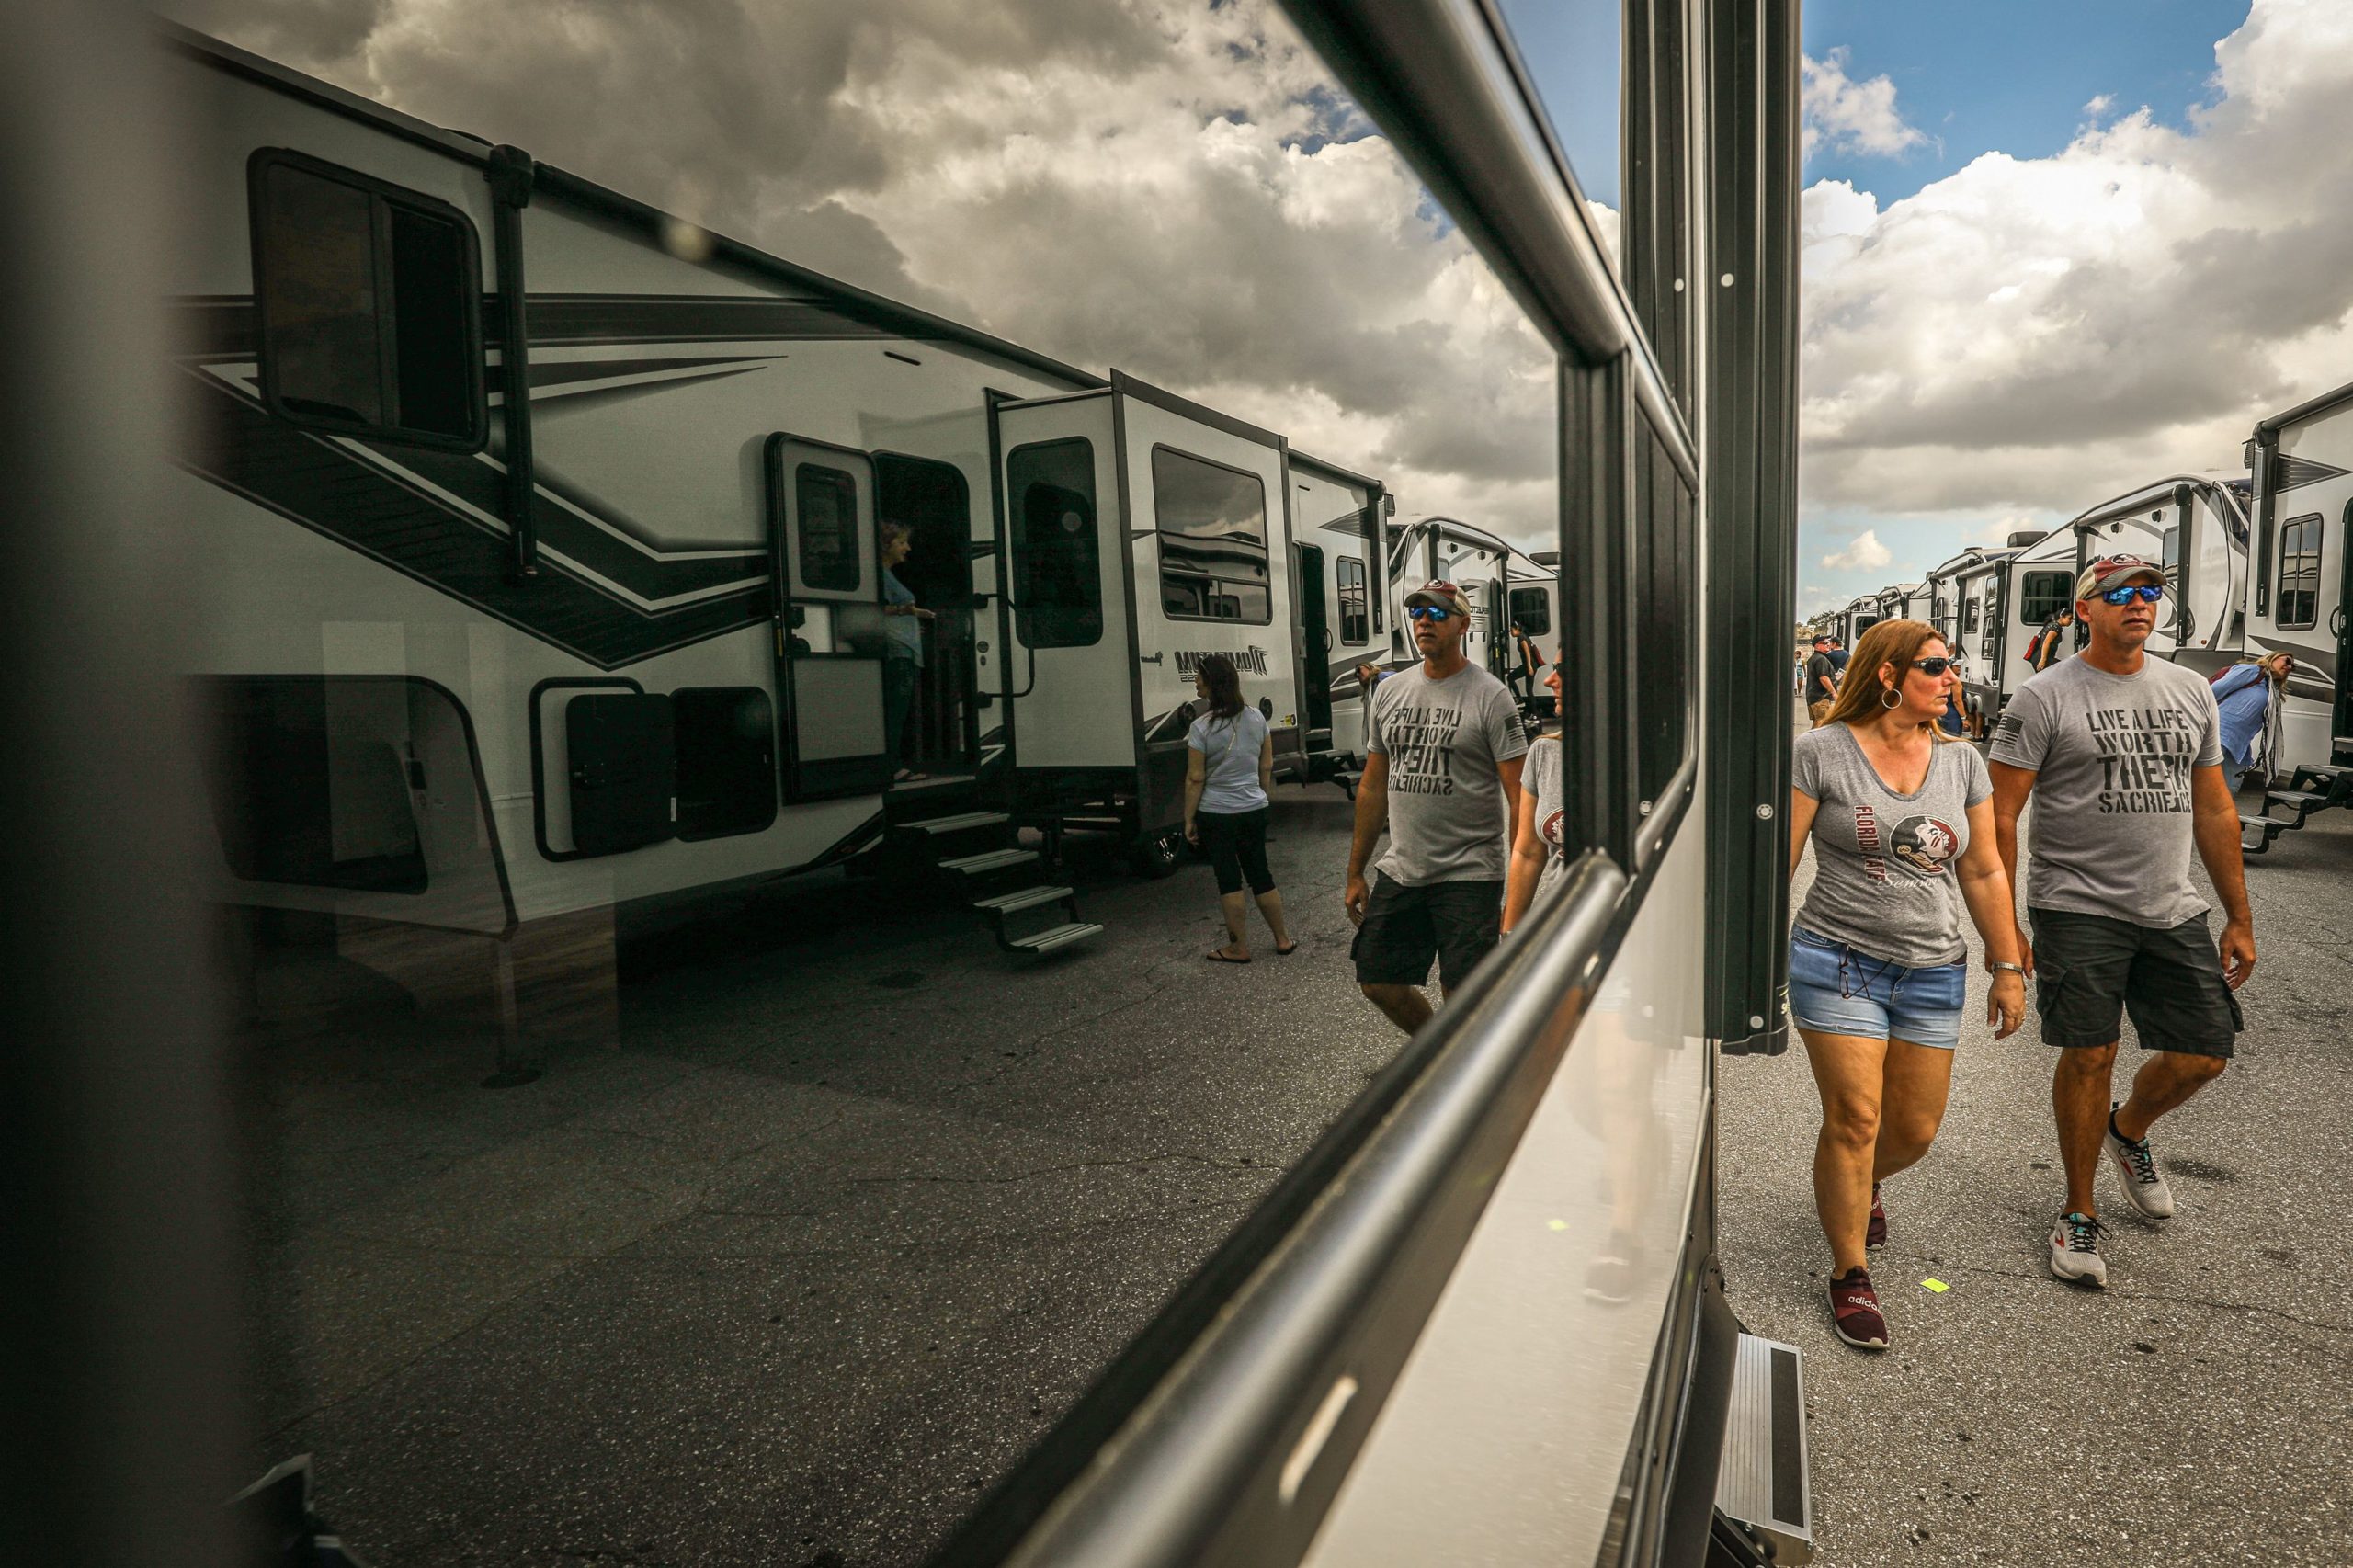 Visitors view recreational vehicles (RV), mobile homes, and motor homes during the West Palm Beach RV Show at the South Florida Fairgrounds in West Palm Beach, Florida, on February 19, 2023.(Photo by GIORGIO VIERA/AFP via Getty Images)